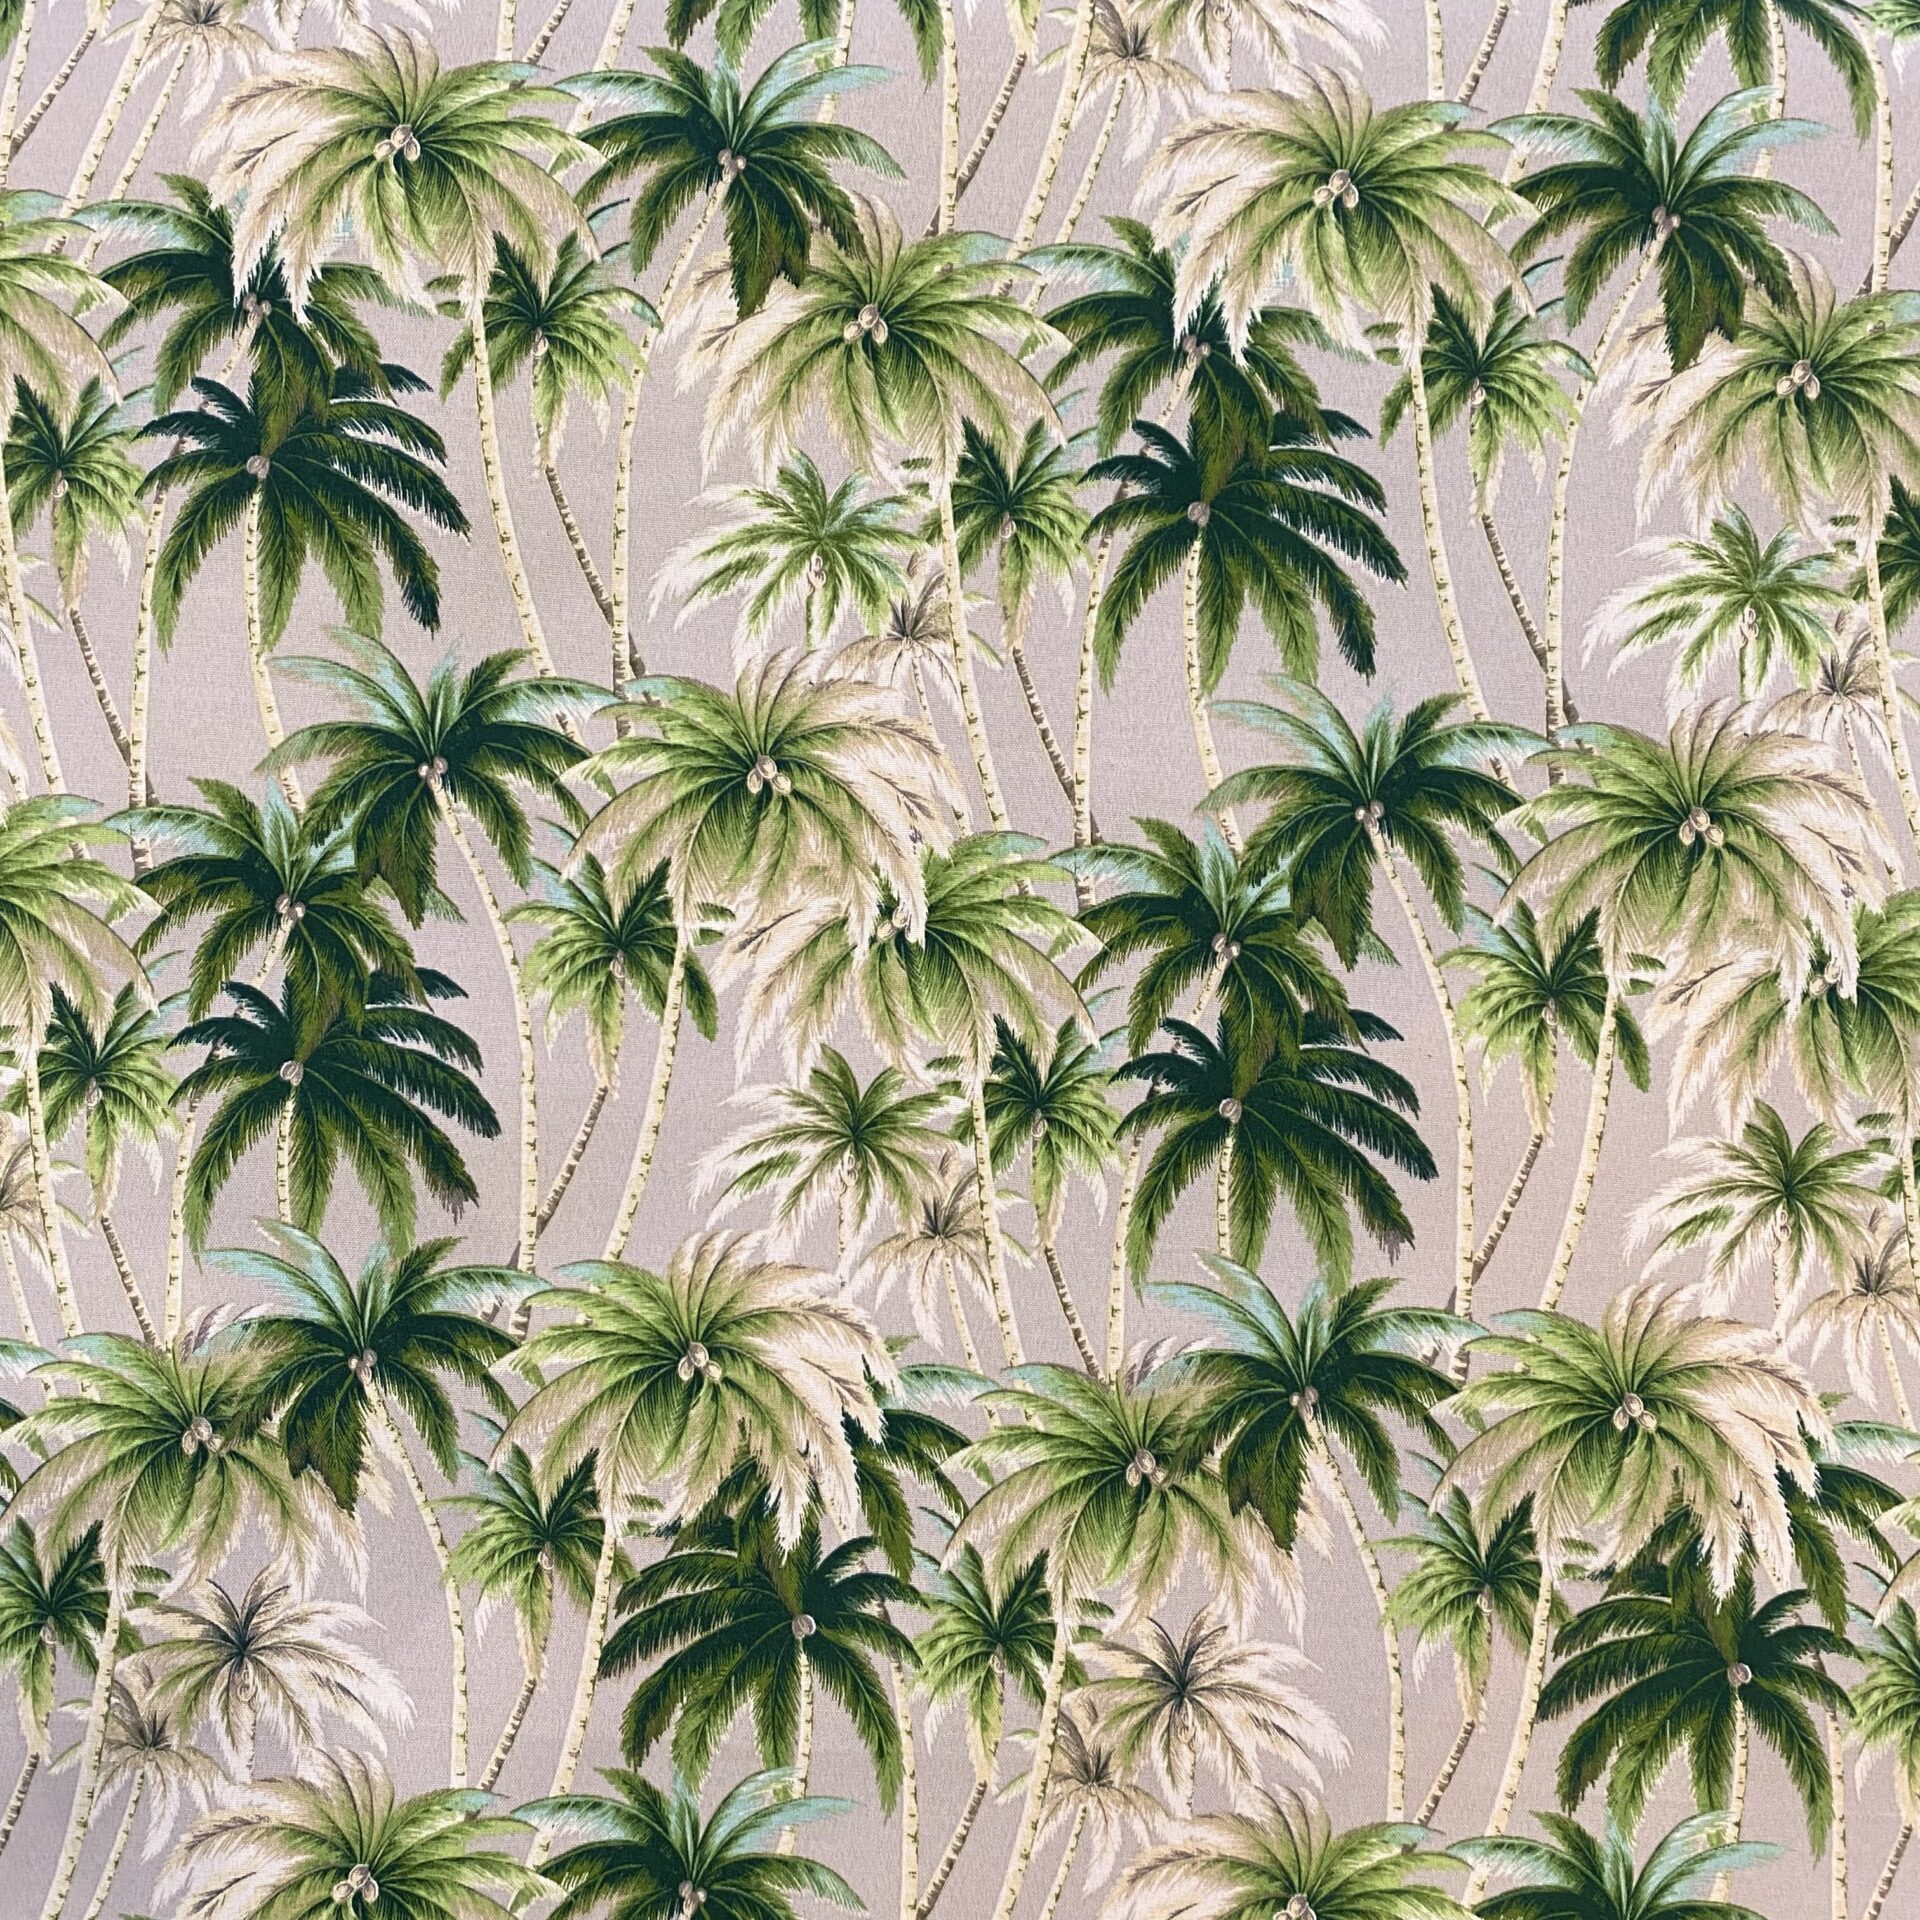 Tommy Bahama Fabric for Indoor and Outdoor Seating. 